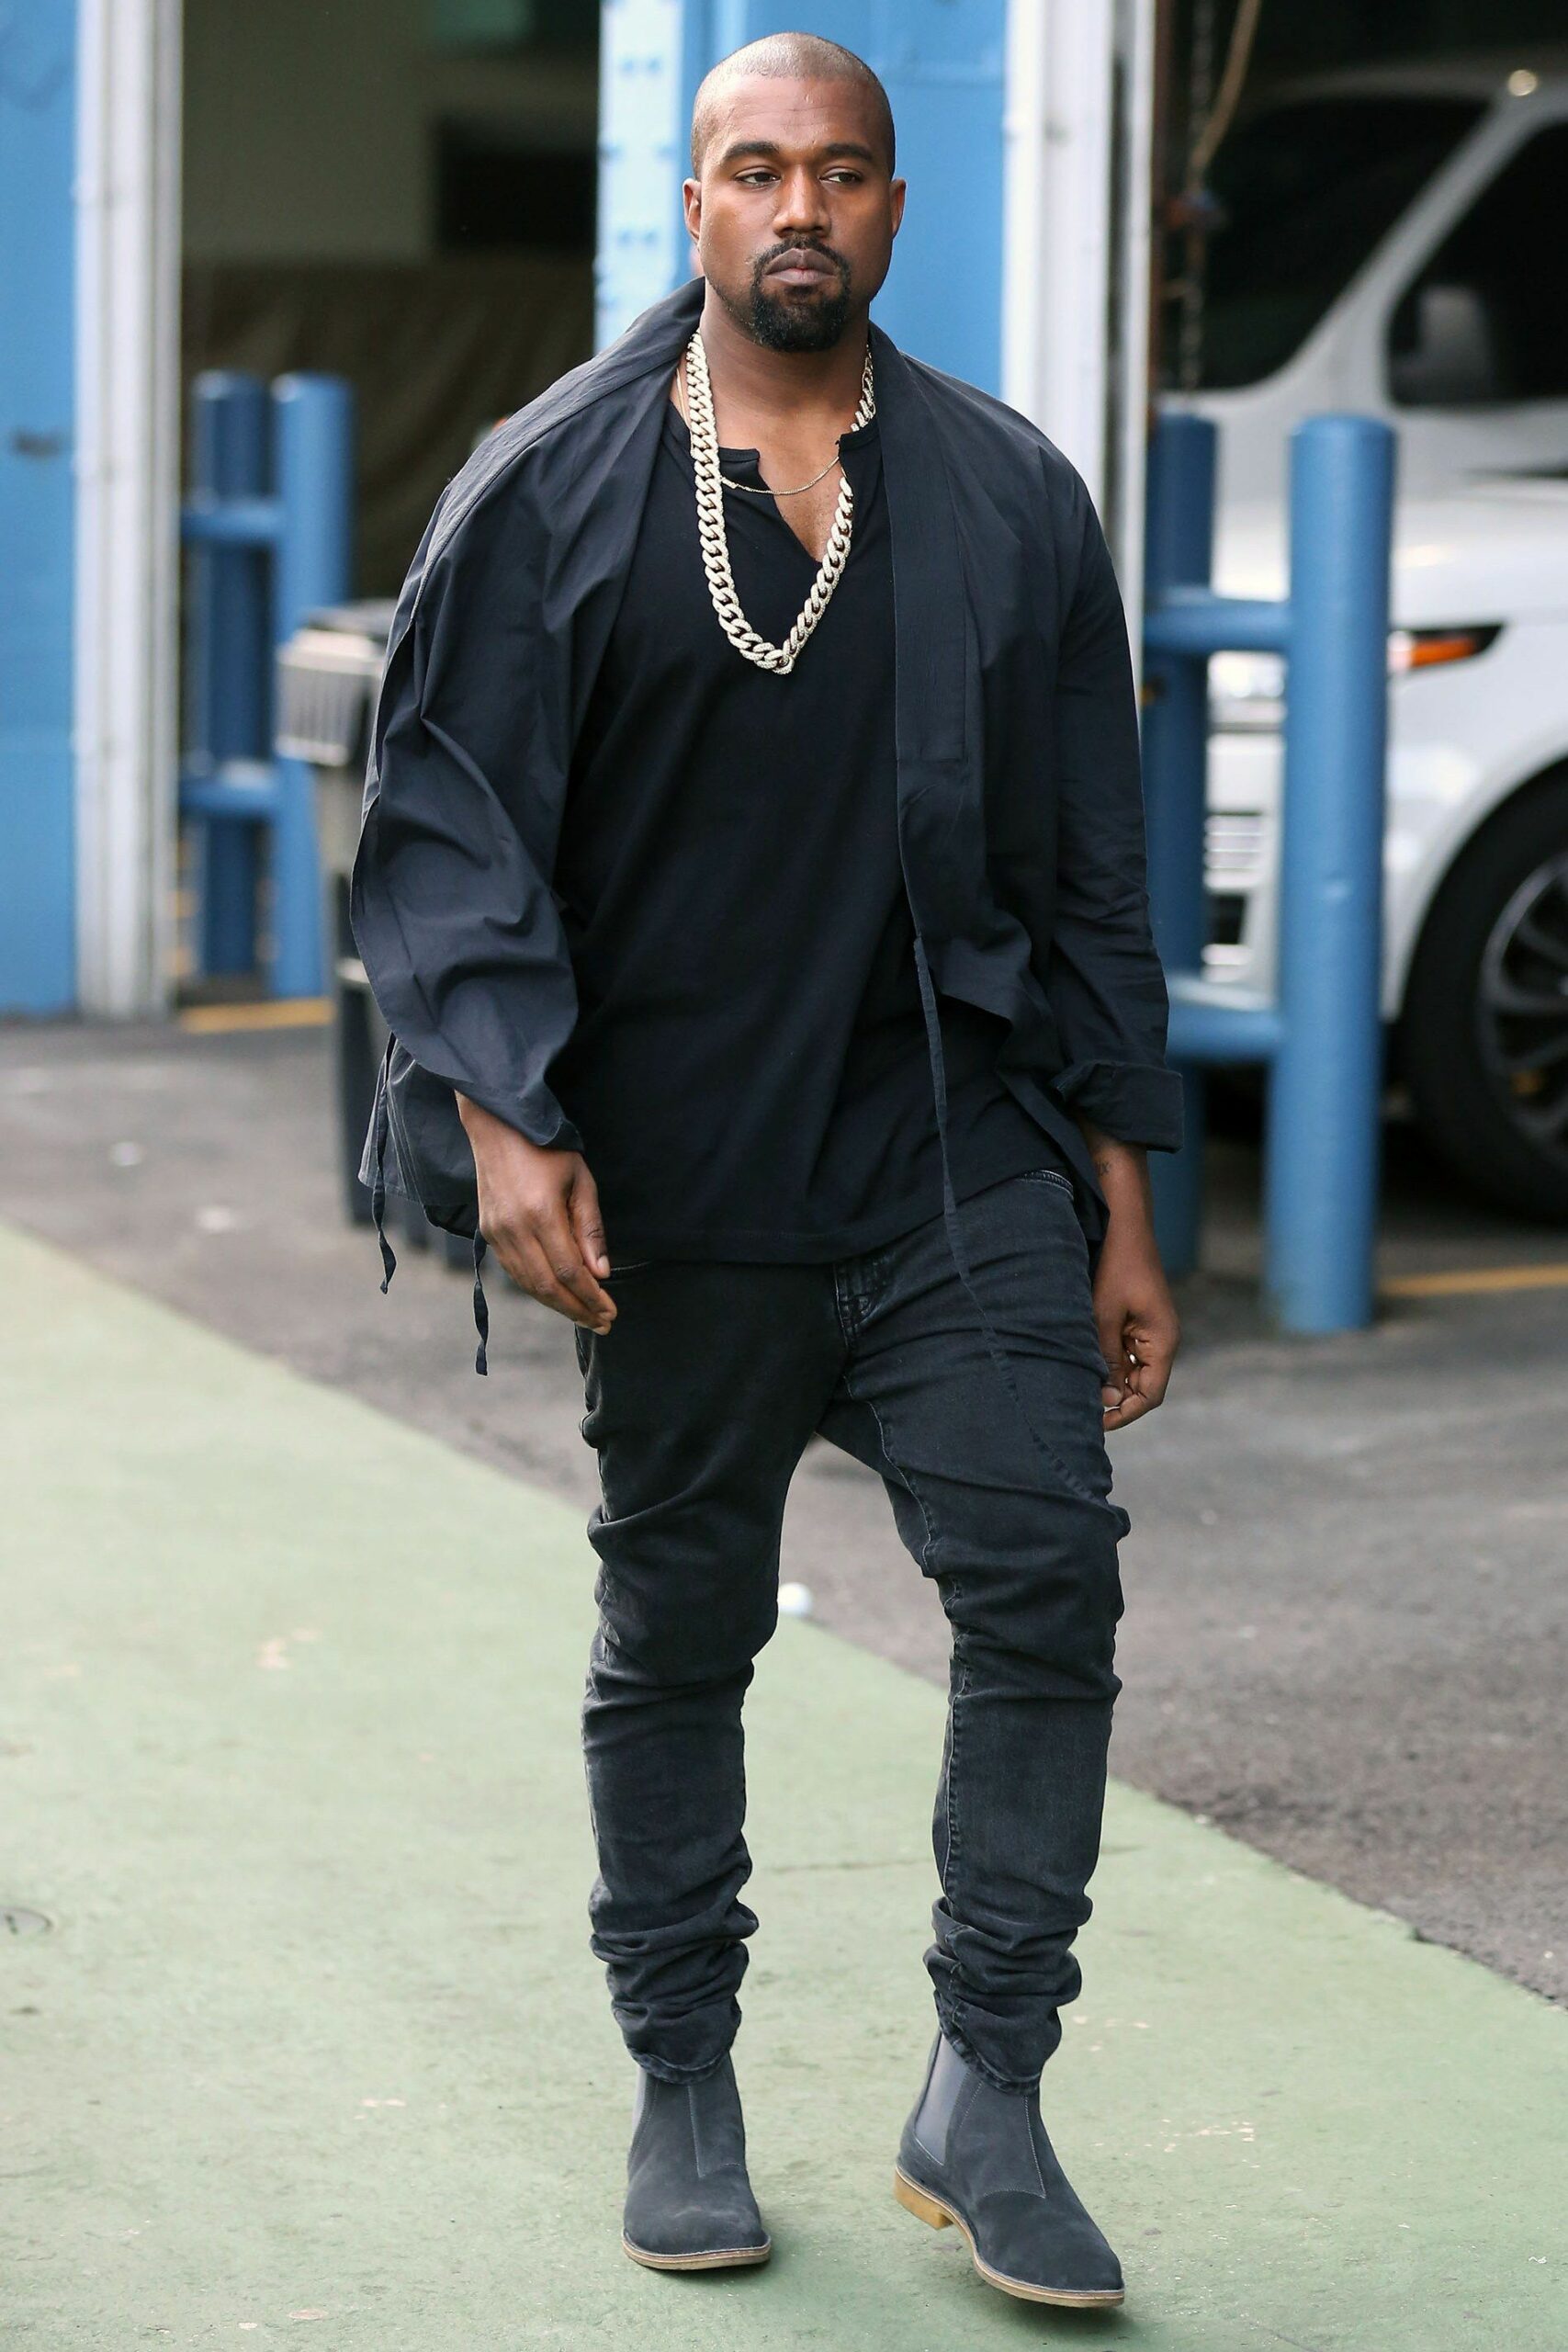 How Tall Is Kanye West? 20 Engrossing Facts About Him - Siachen Studios